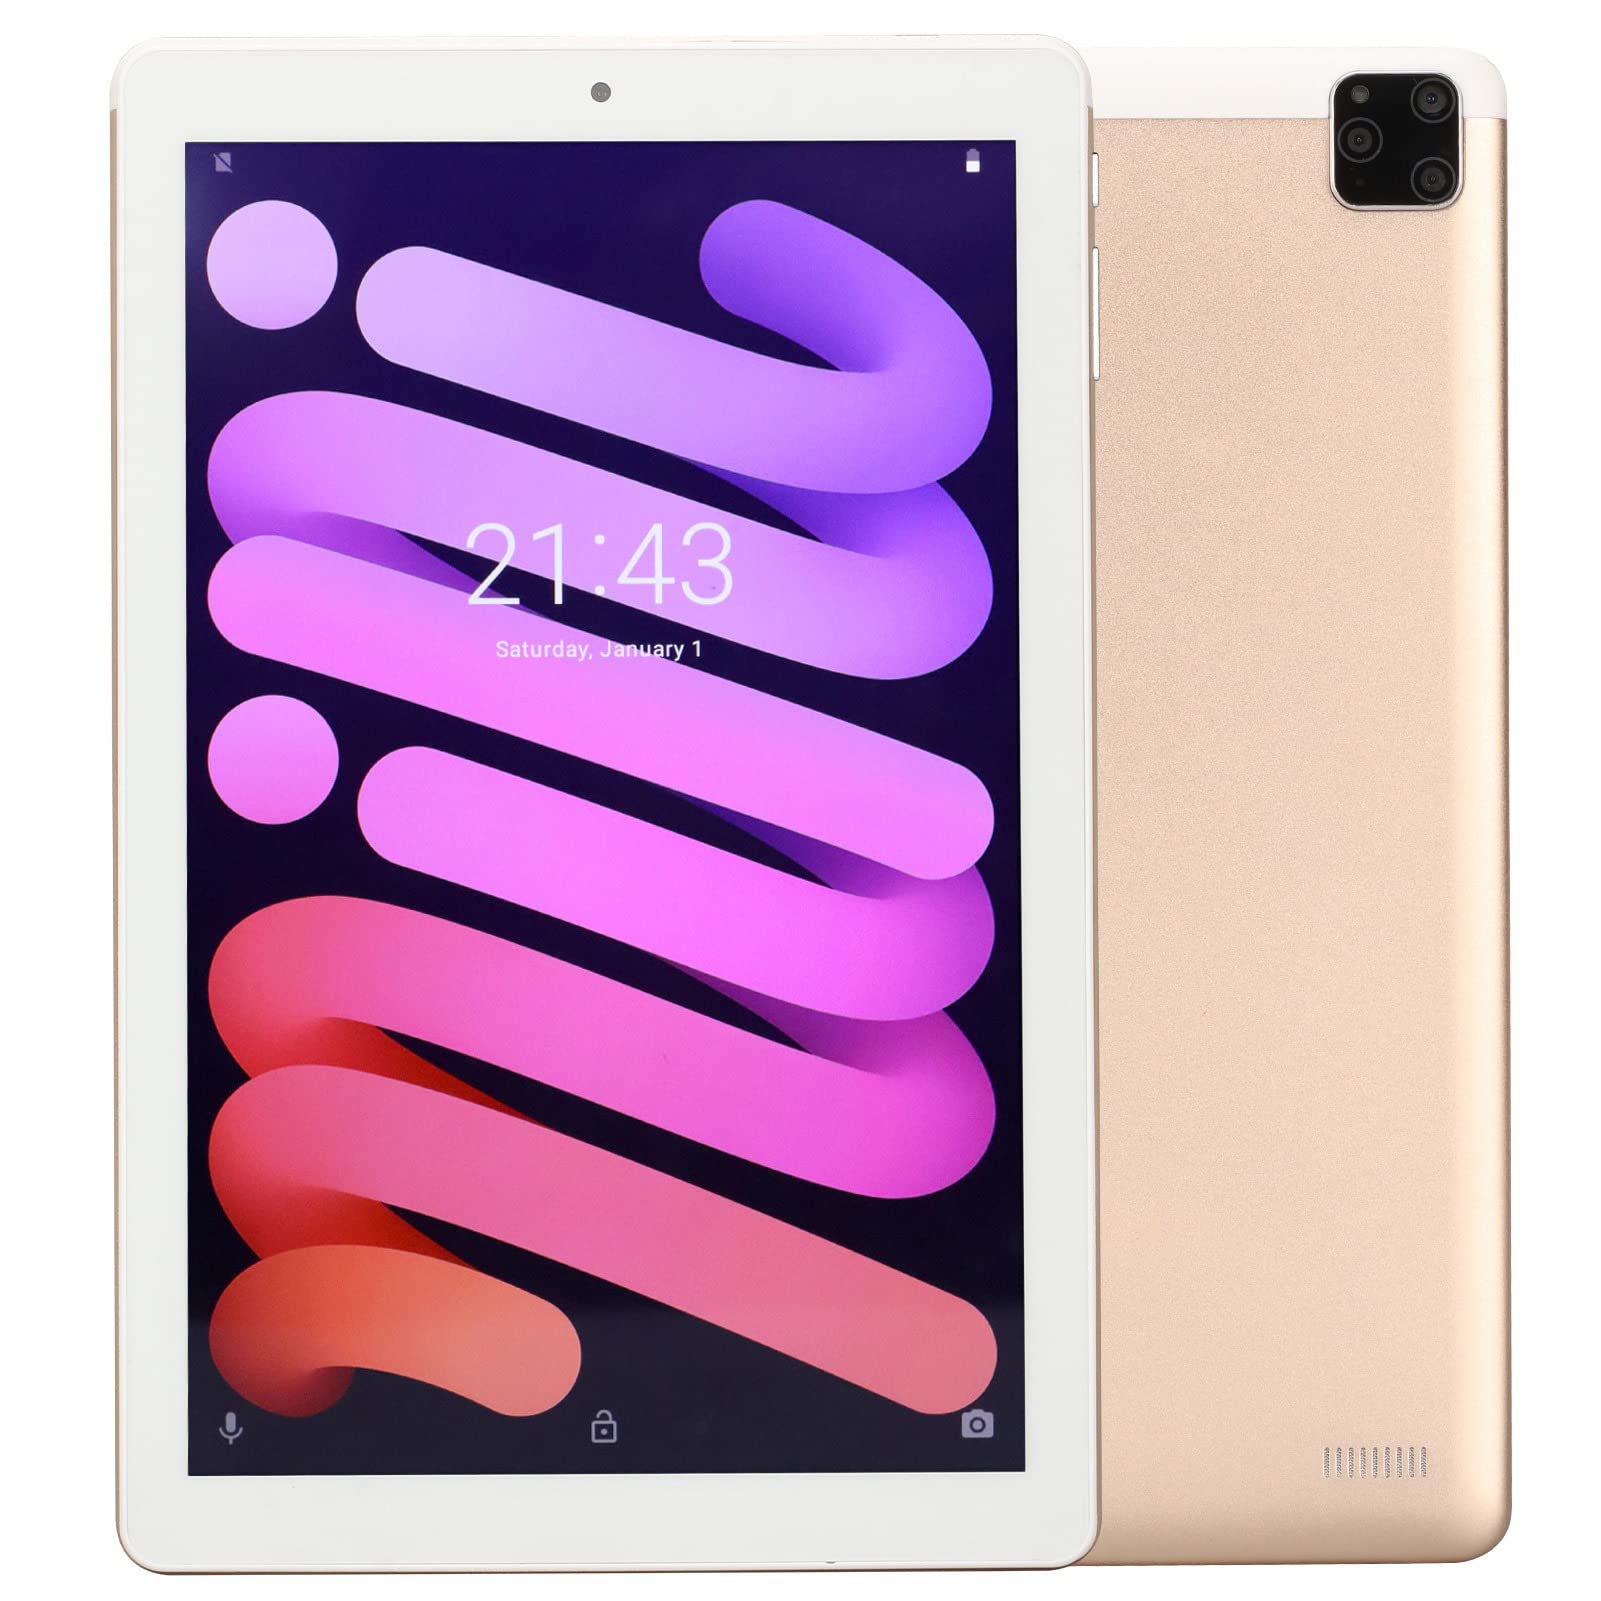 10 Inch Tablet, Android11 System 4G RAM 256G ROM Support WiFi 3G Networks Gold Tablet for Android 11 for Study, Watch Videos, Read Books